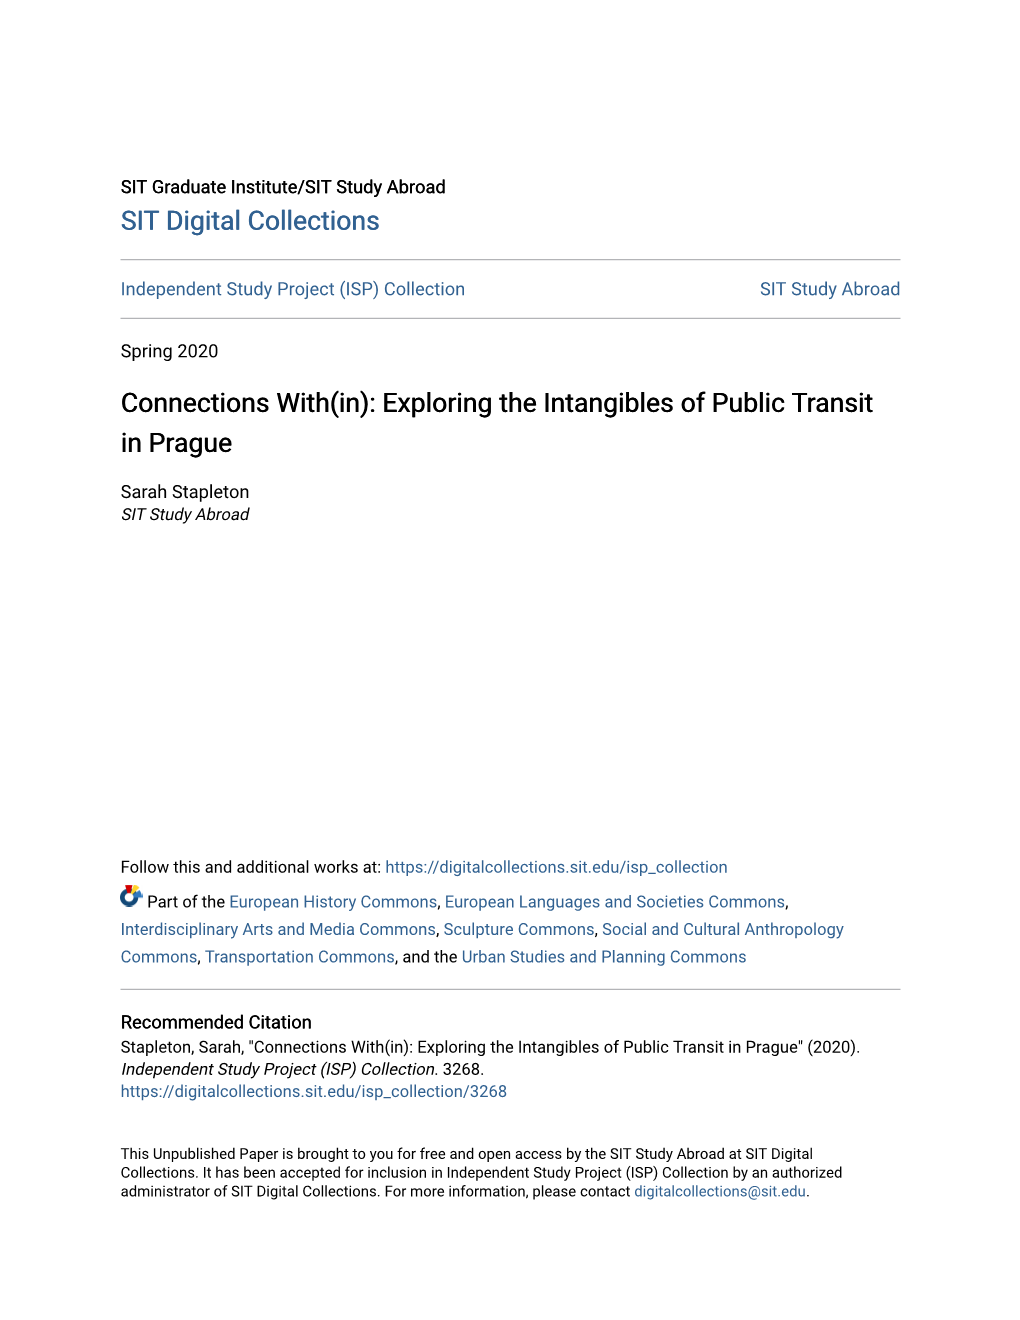 Connections With(In): Exploring the Intangibles of Public Transit in Prague